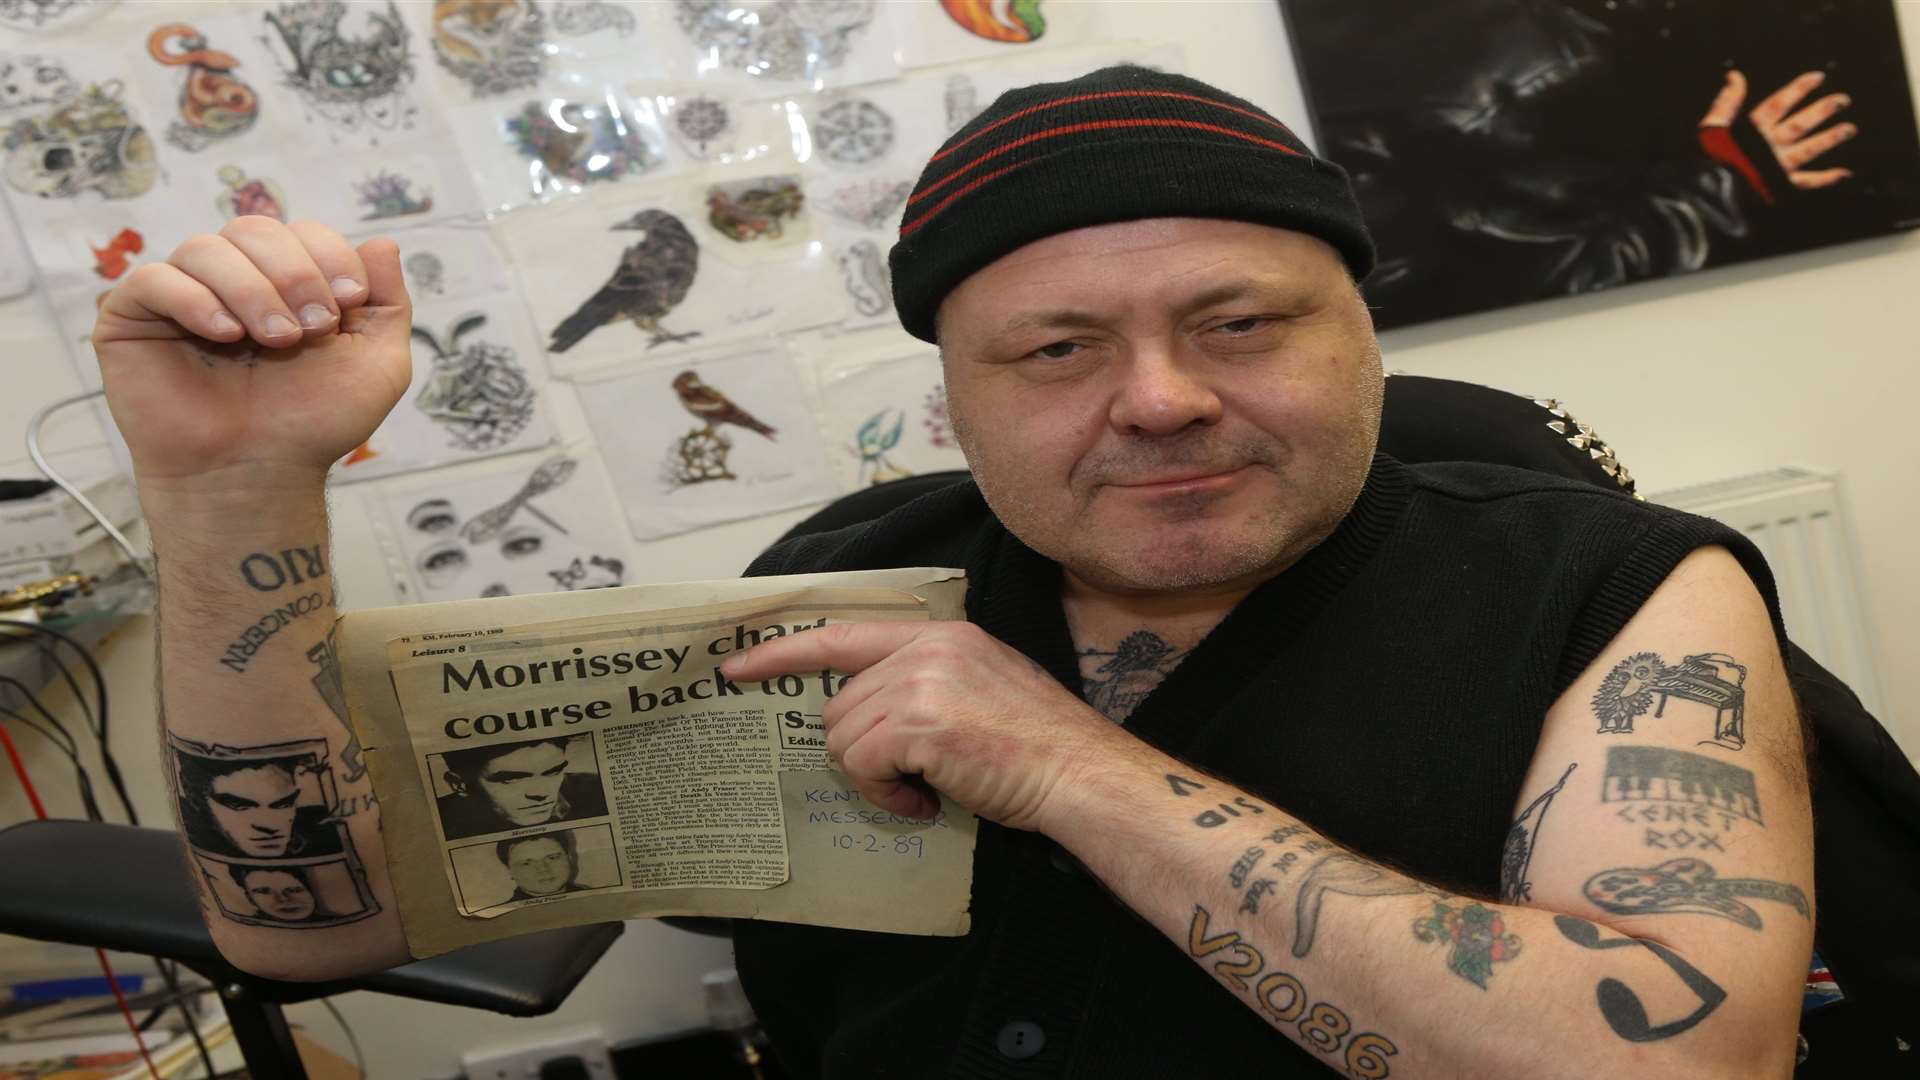 Musician Andy Fraser at Shady Adey’s Tattoo studio in Maidstone, where he got a tattoo of the KM pictures on his arm